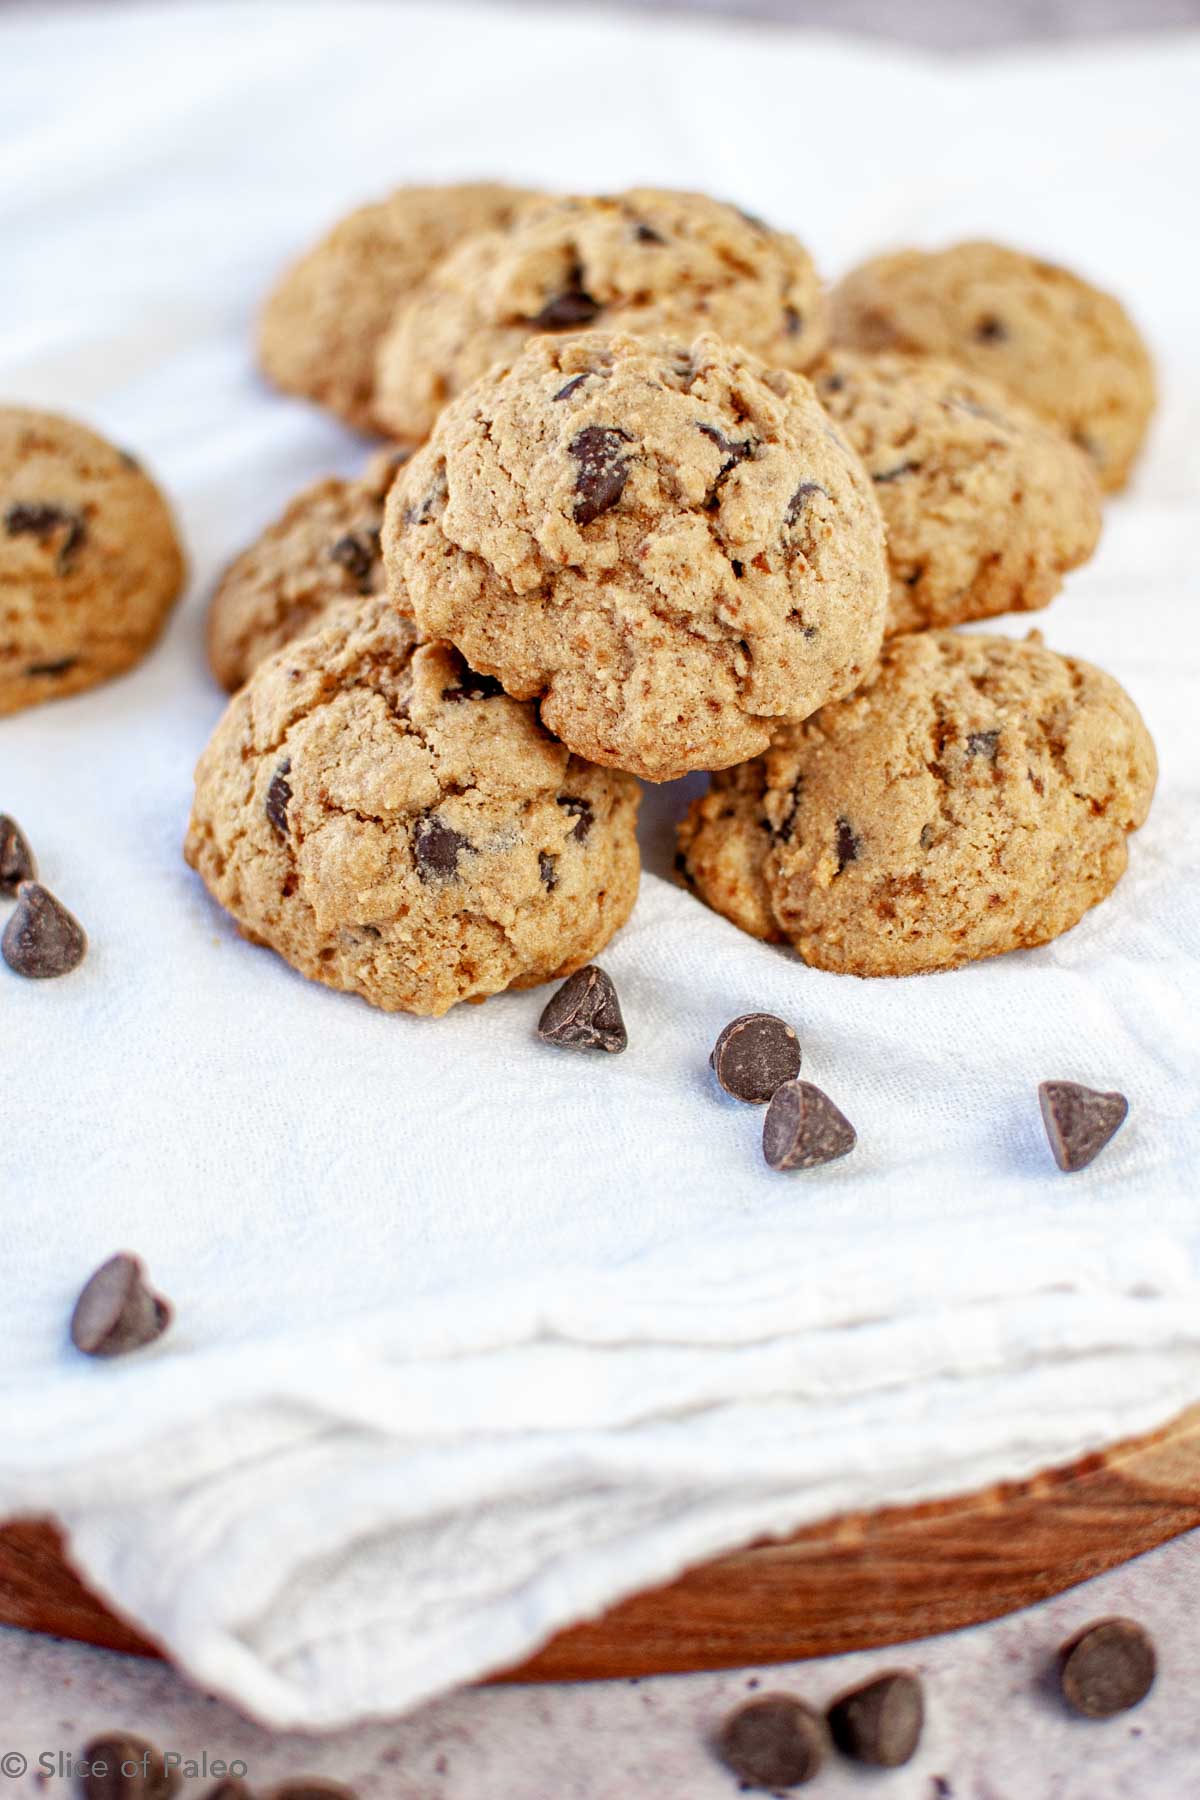 Paleo Chocolate Chip Cookies baked and ready to serve